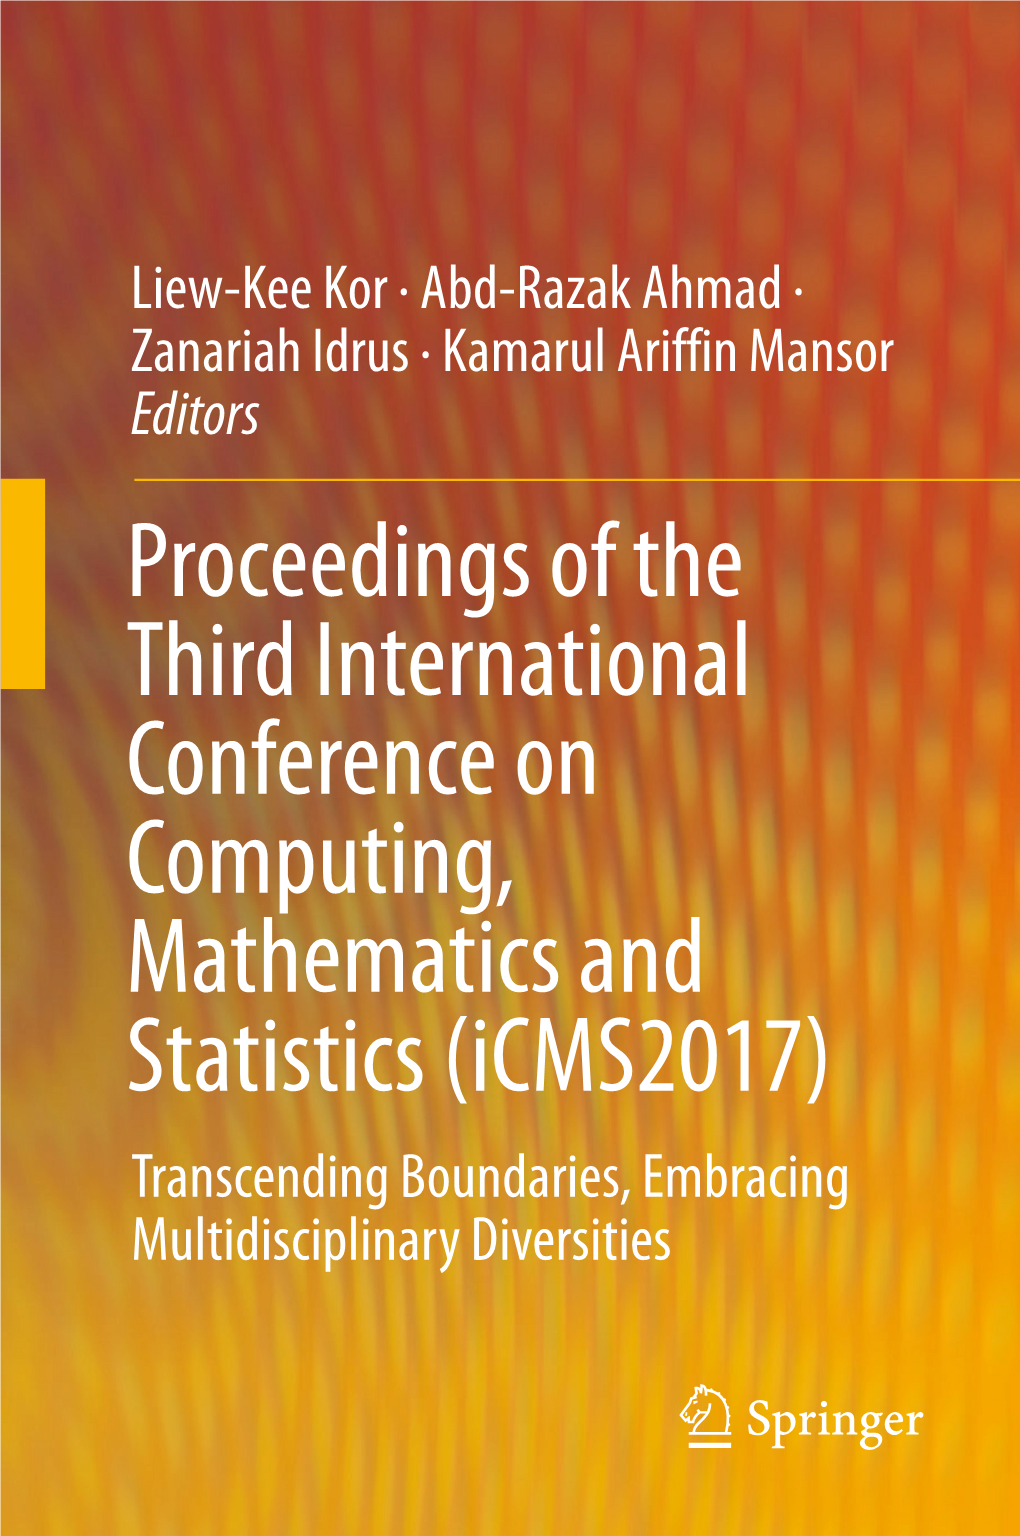 Proceedings of the Third International Conference on Computing